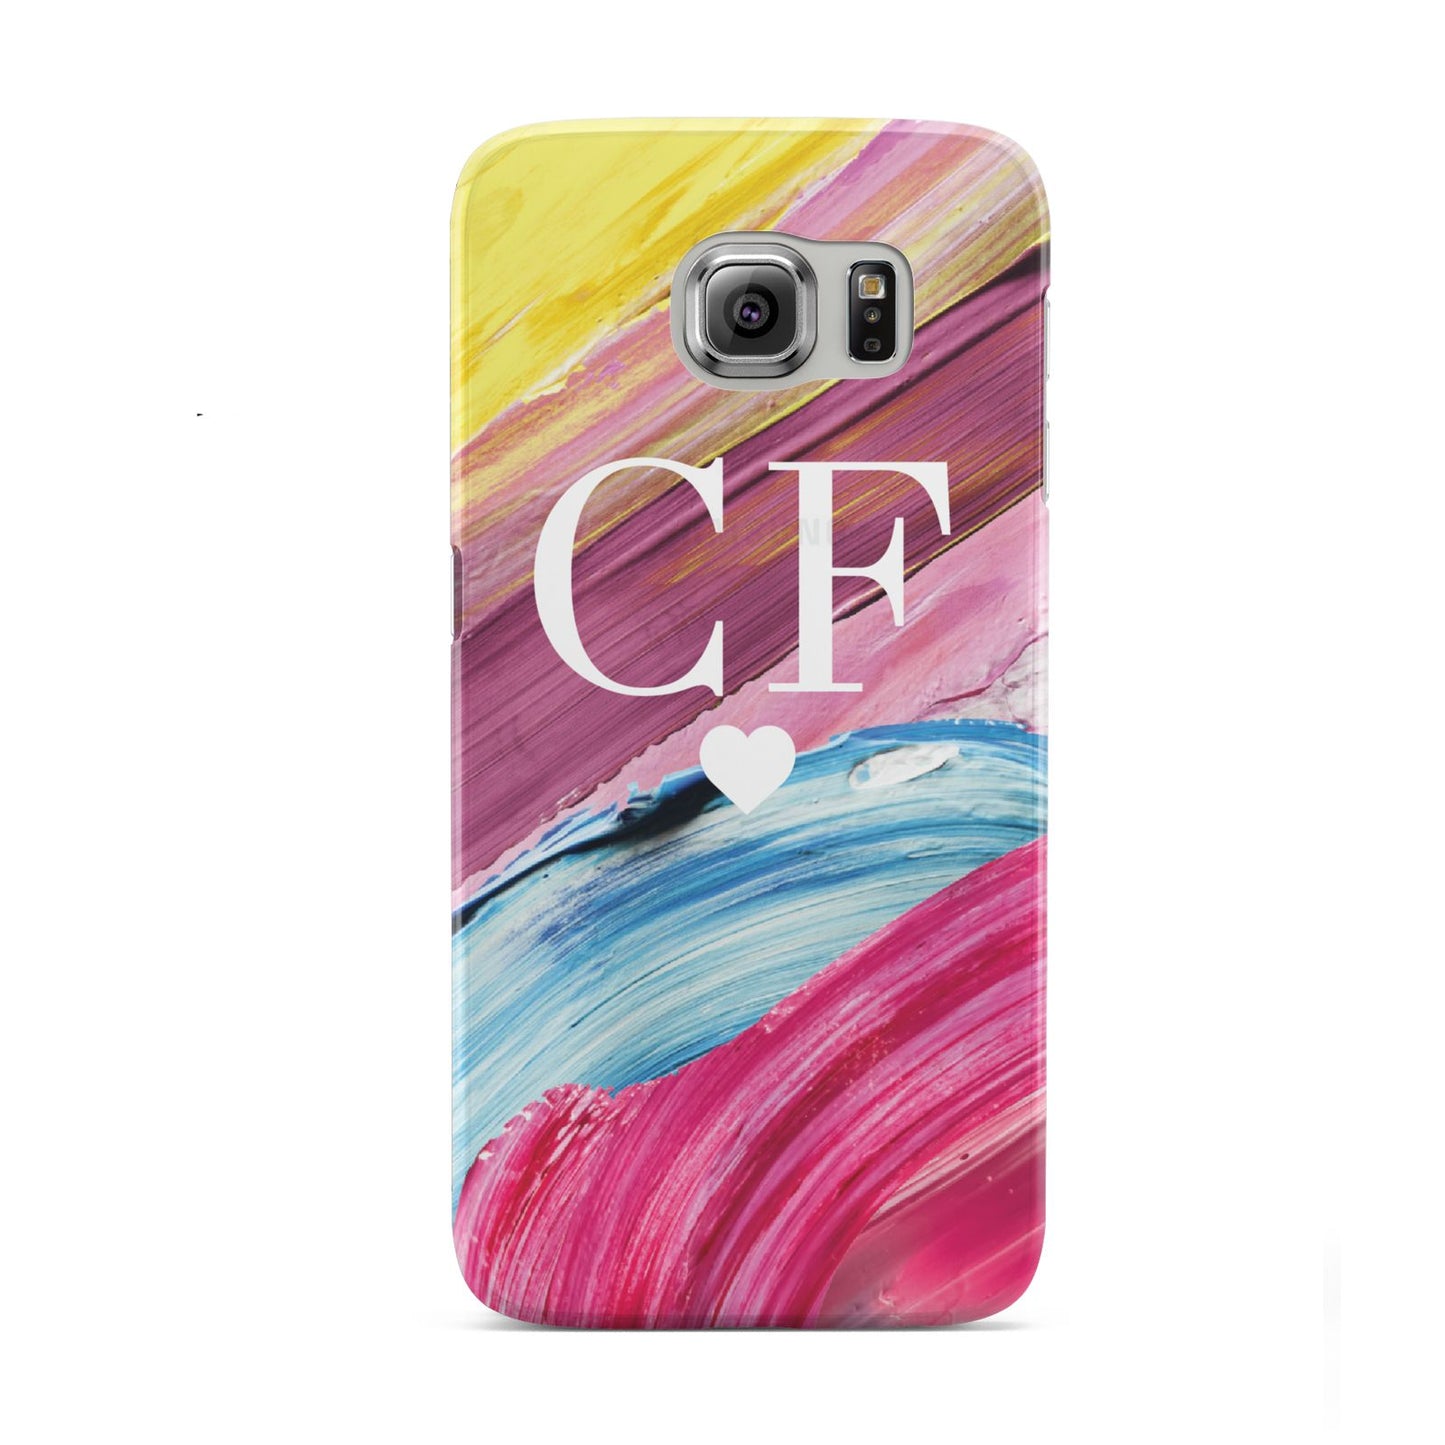 Personalised Paint Brush Initials Samsung Galaxy S6 Case